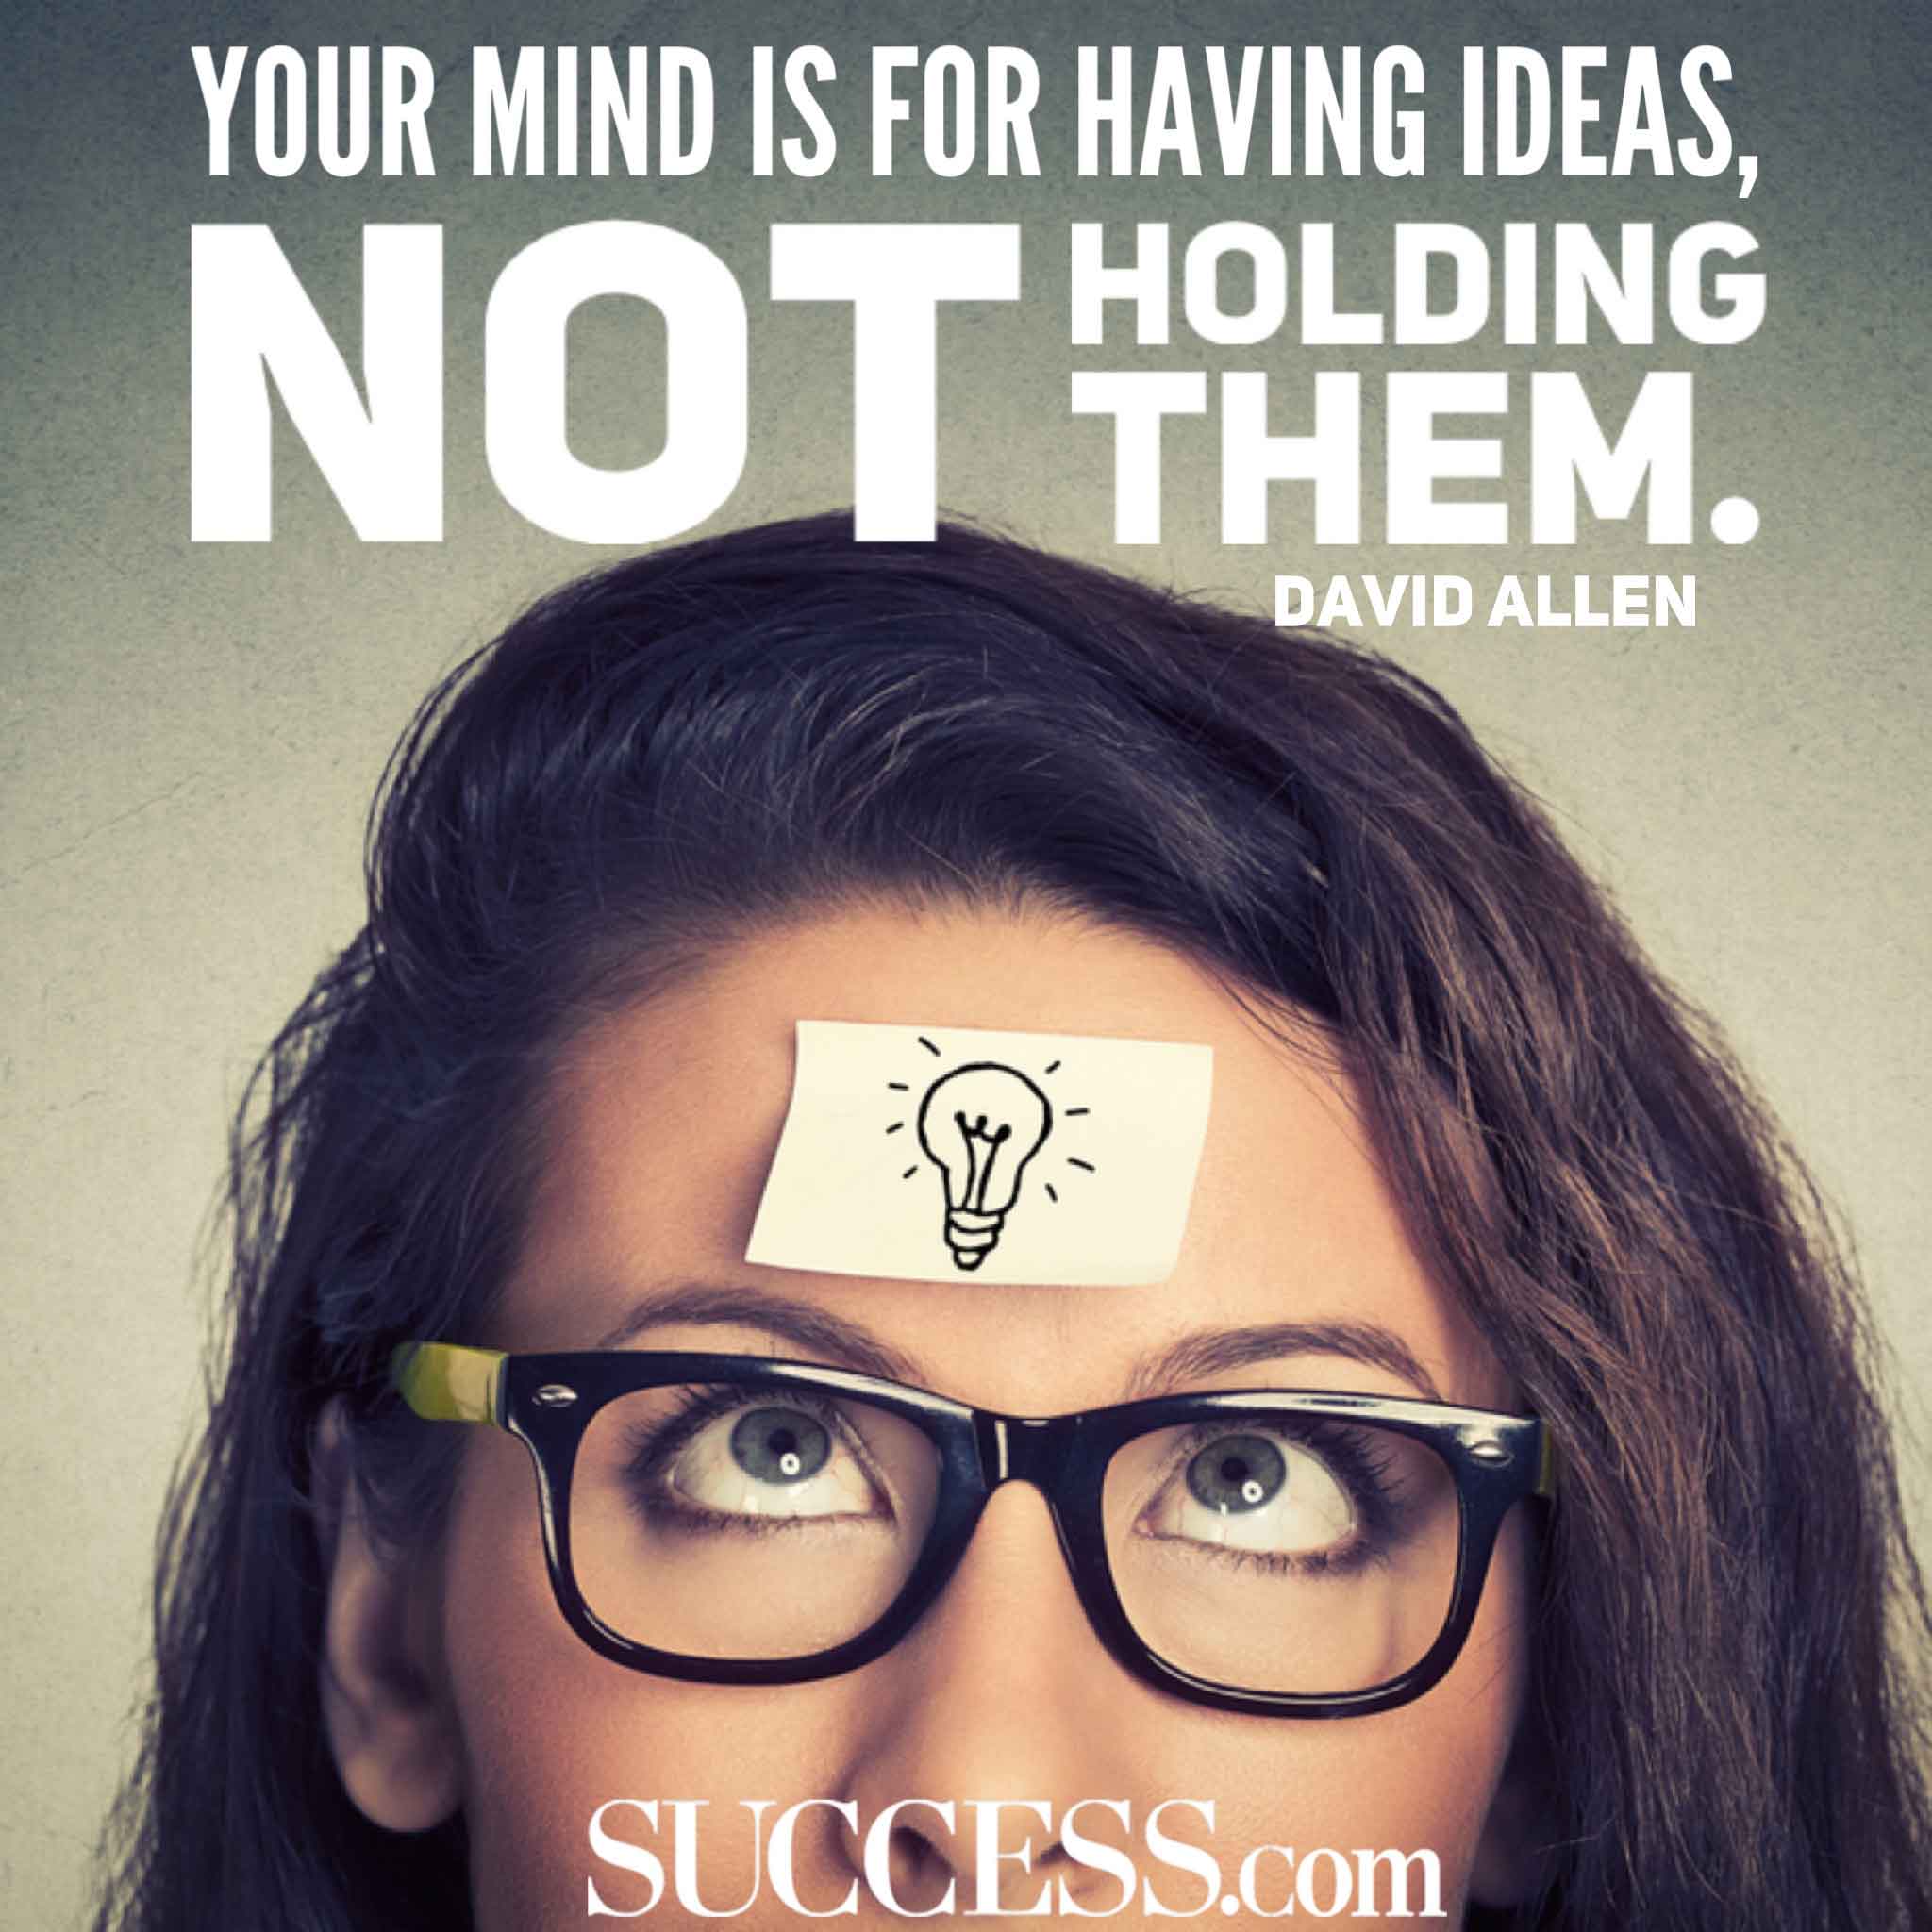 “Your mind is for having ideas not holding them.” —David Allen-hoogbegaafd